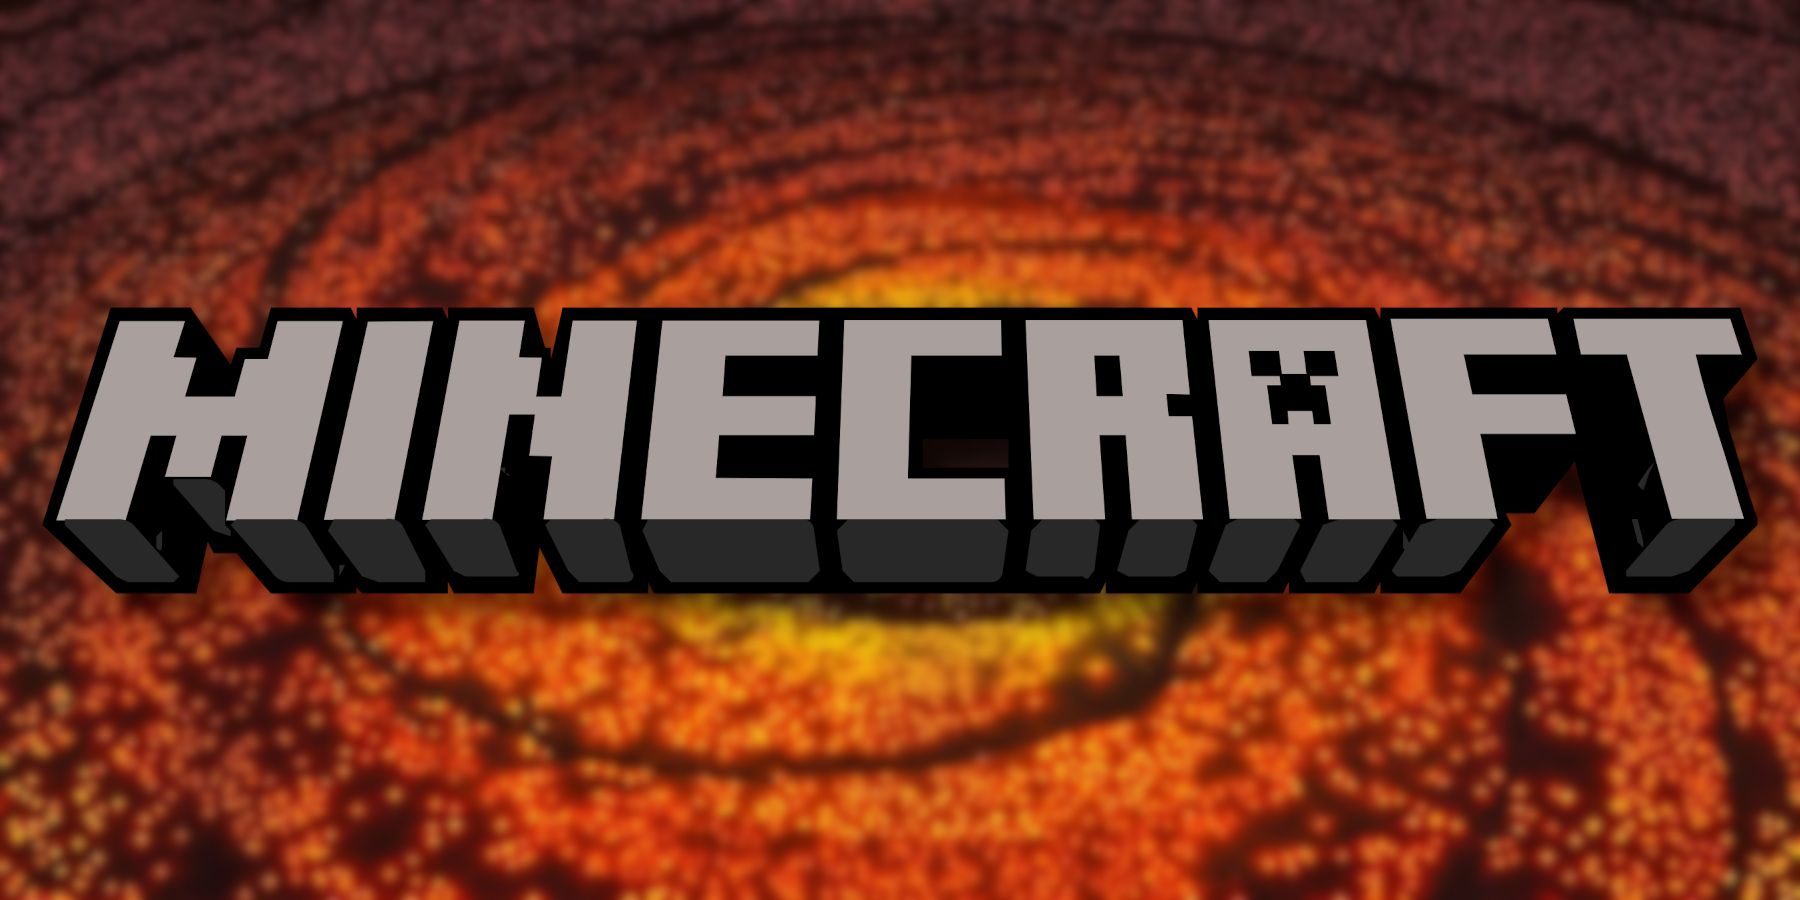 The Minecraft logo with a swirling black hole in the background.